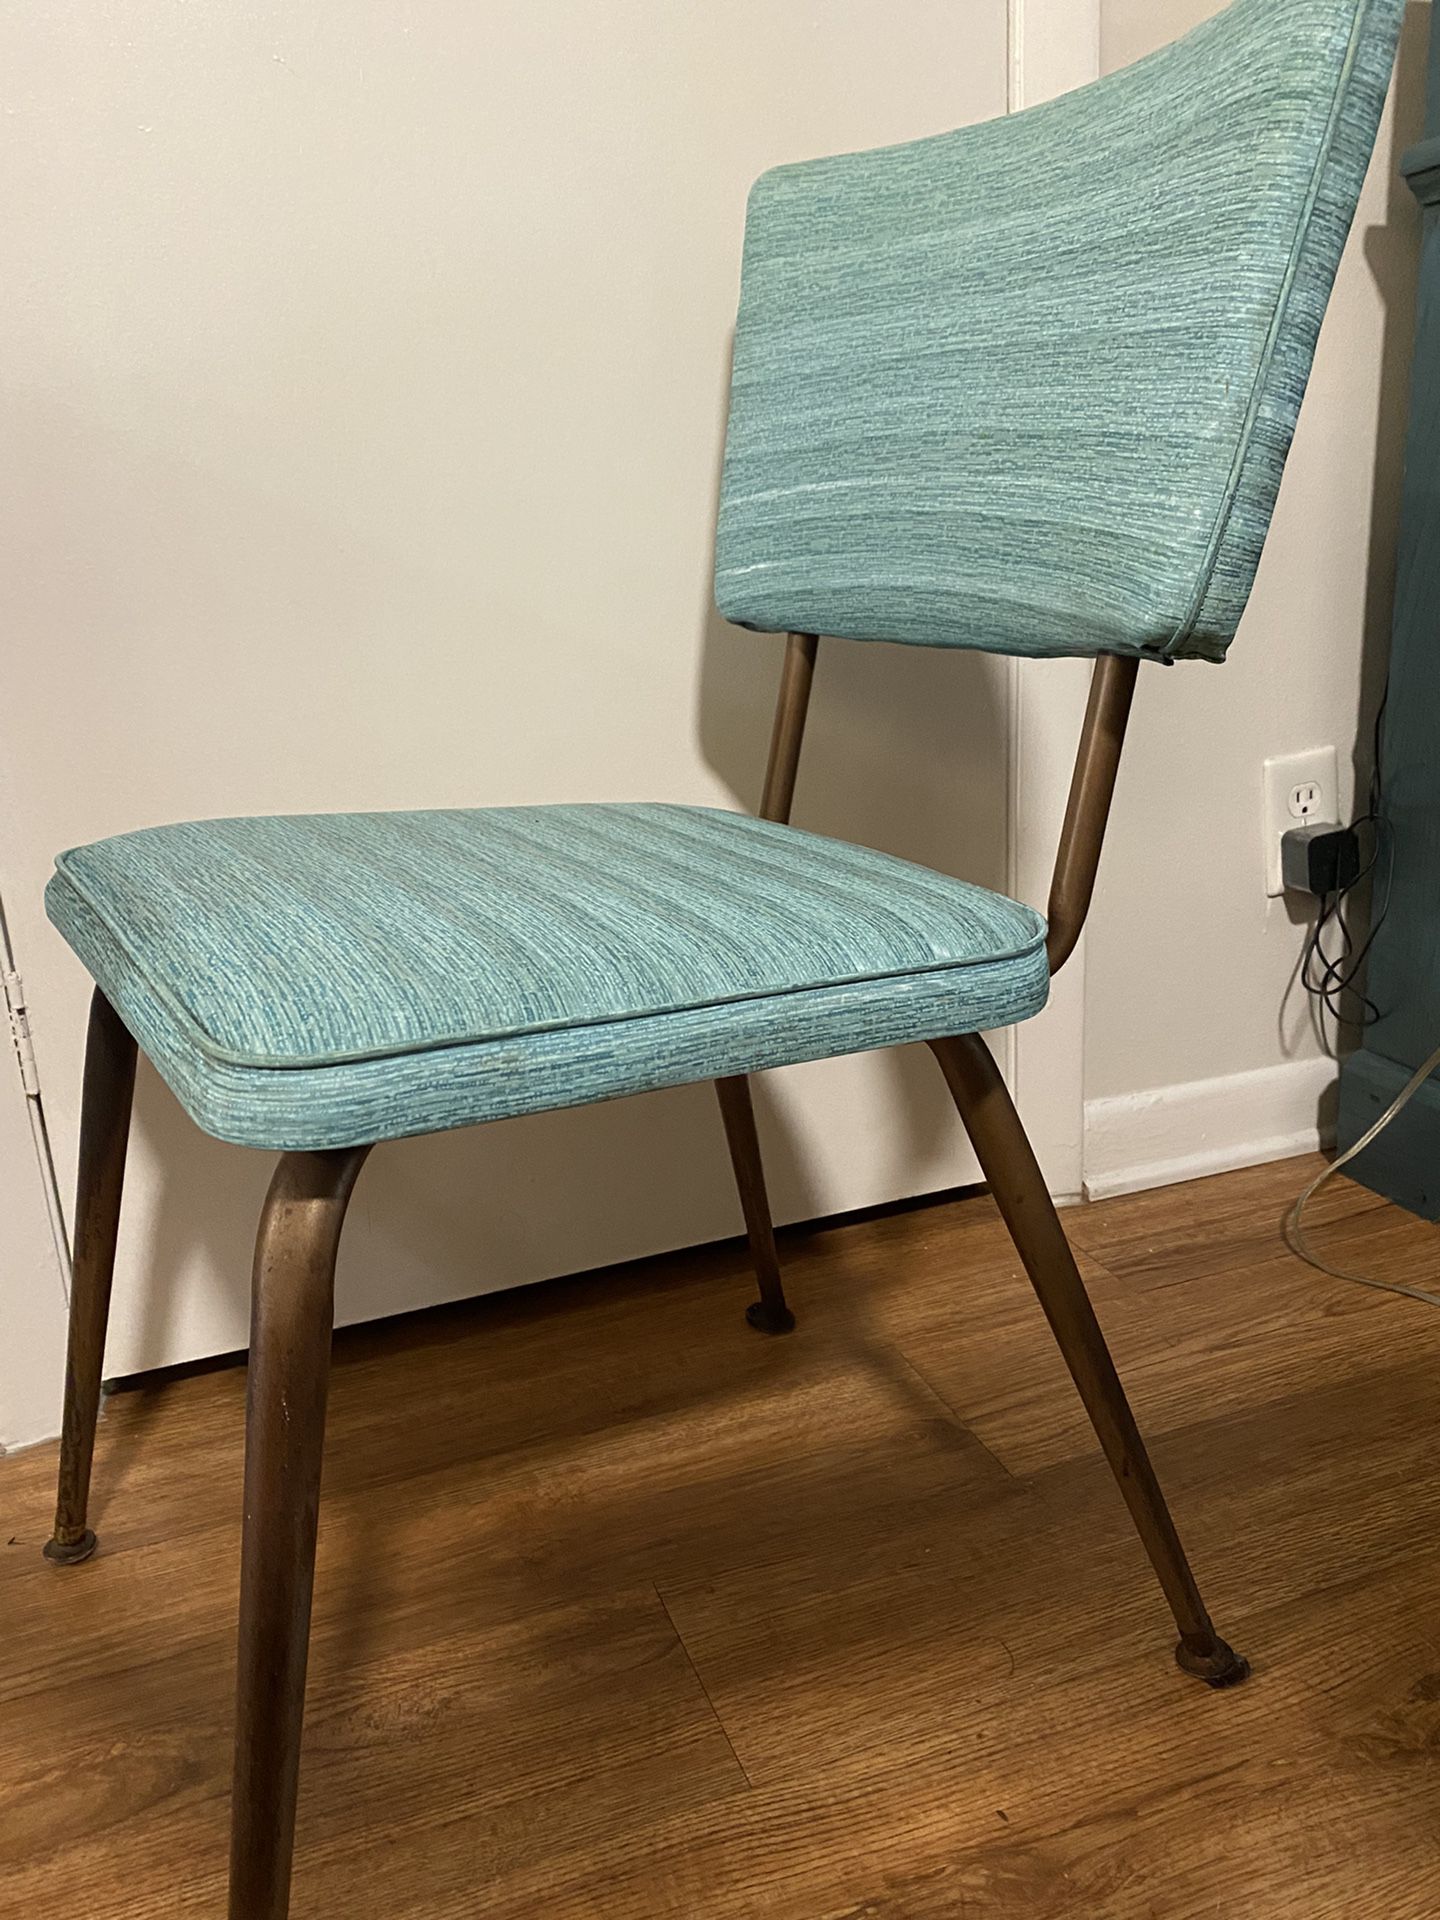 4 Vintage Mid-Century Daystrom Teal Dinette Chairs